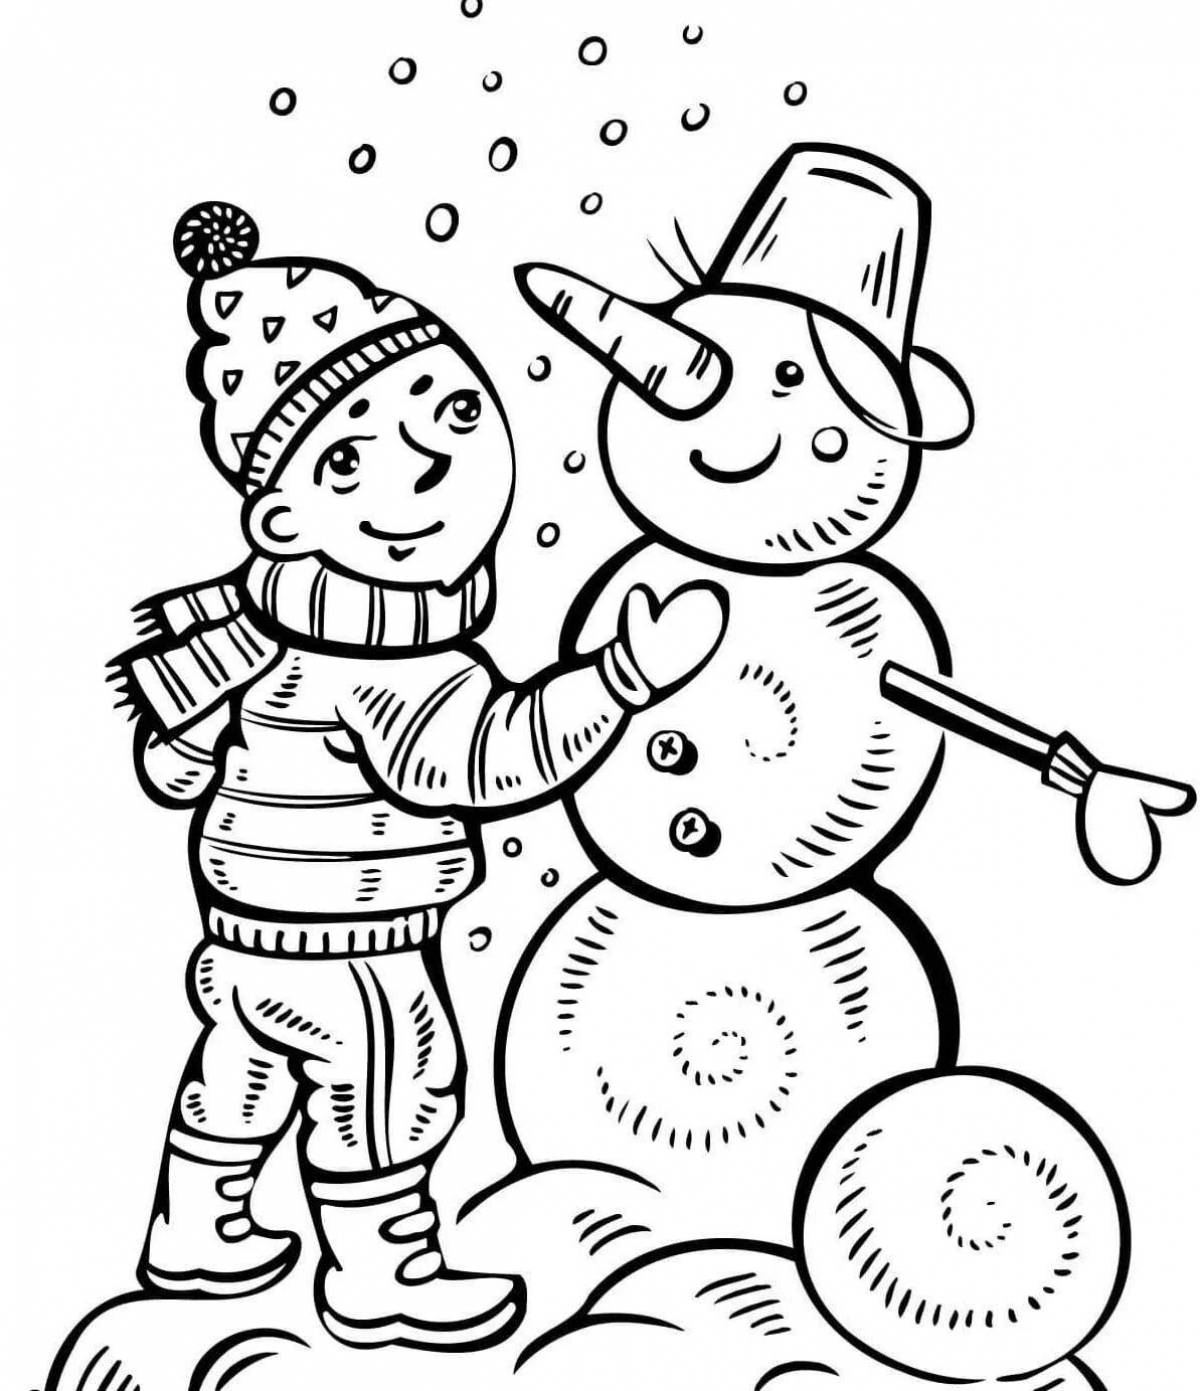 Outlandish snowman coloring page